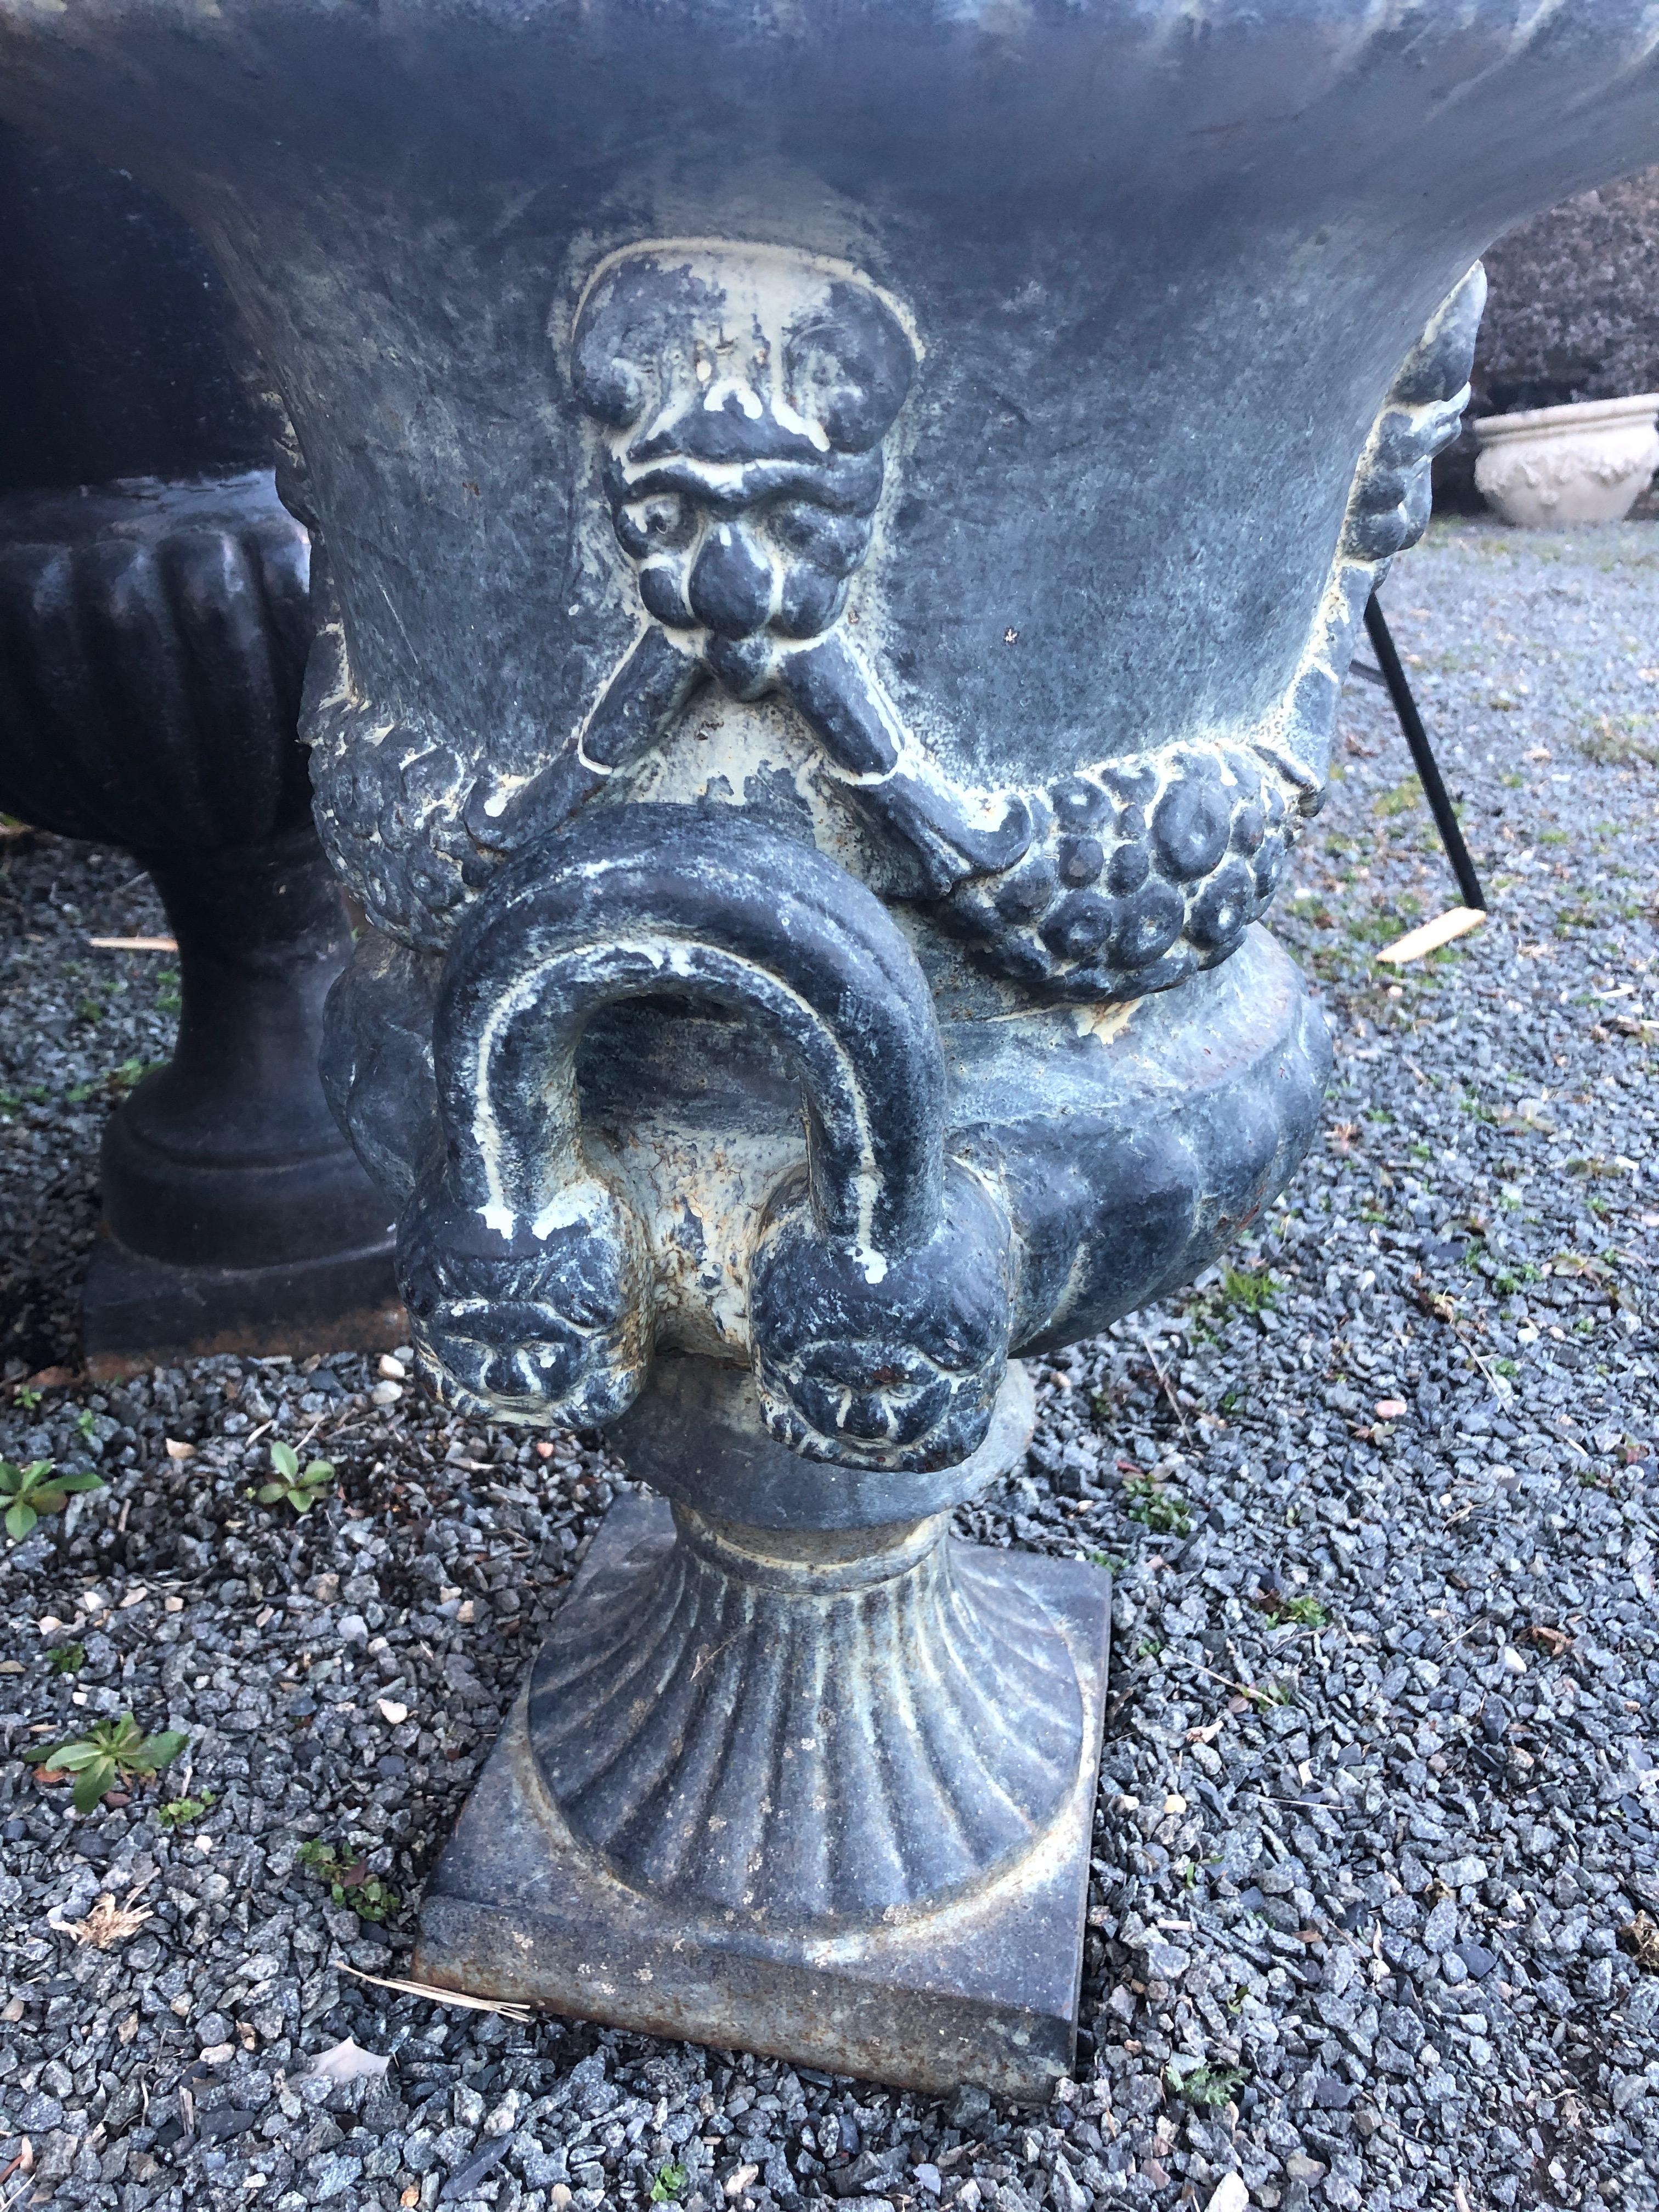 This cast iron jardinière of Classic campana or bell-shaped urn form features a gadrooned edge, raised neoclassical swags and Roman male masks on the body, and handles on either side. Set on a fluted column base with plinth foot, its natural patina